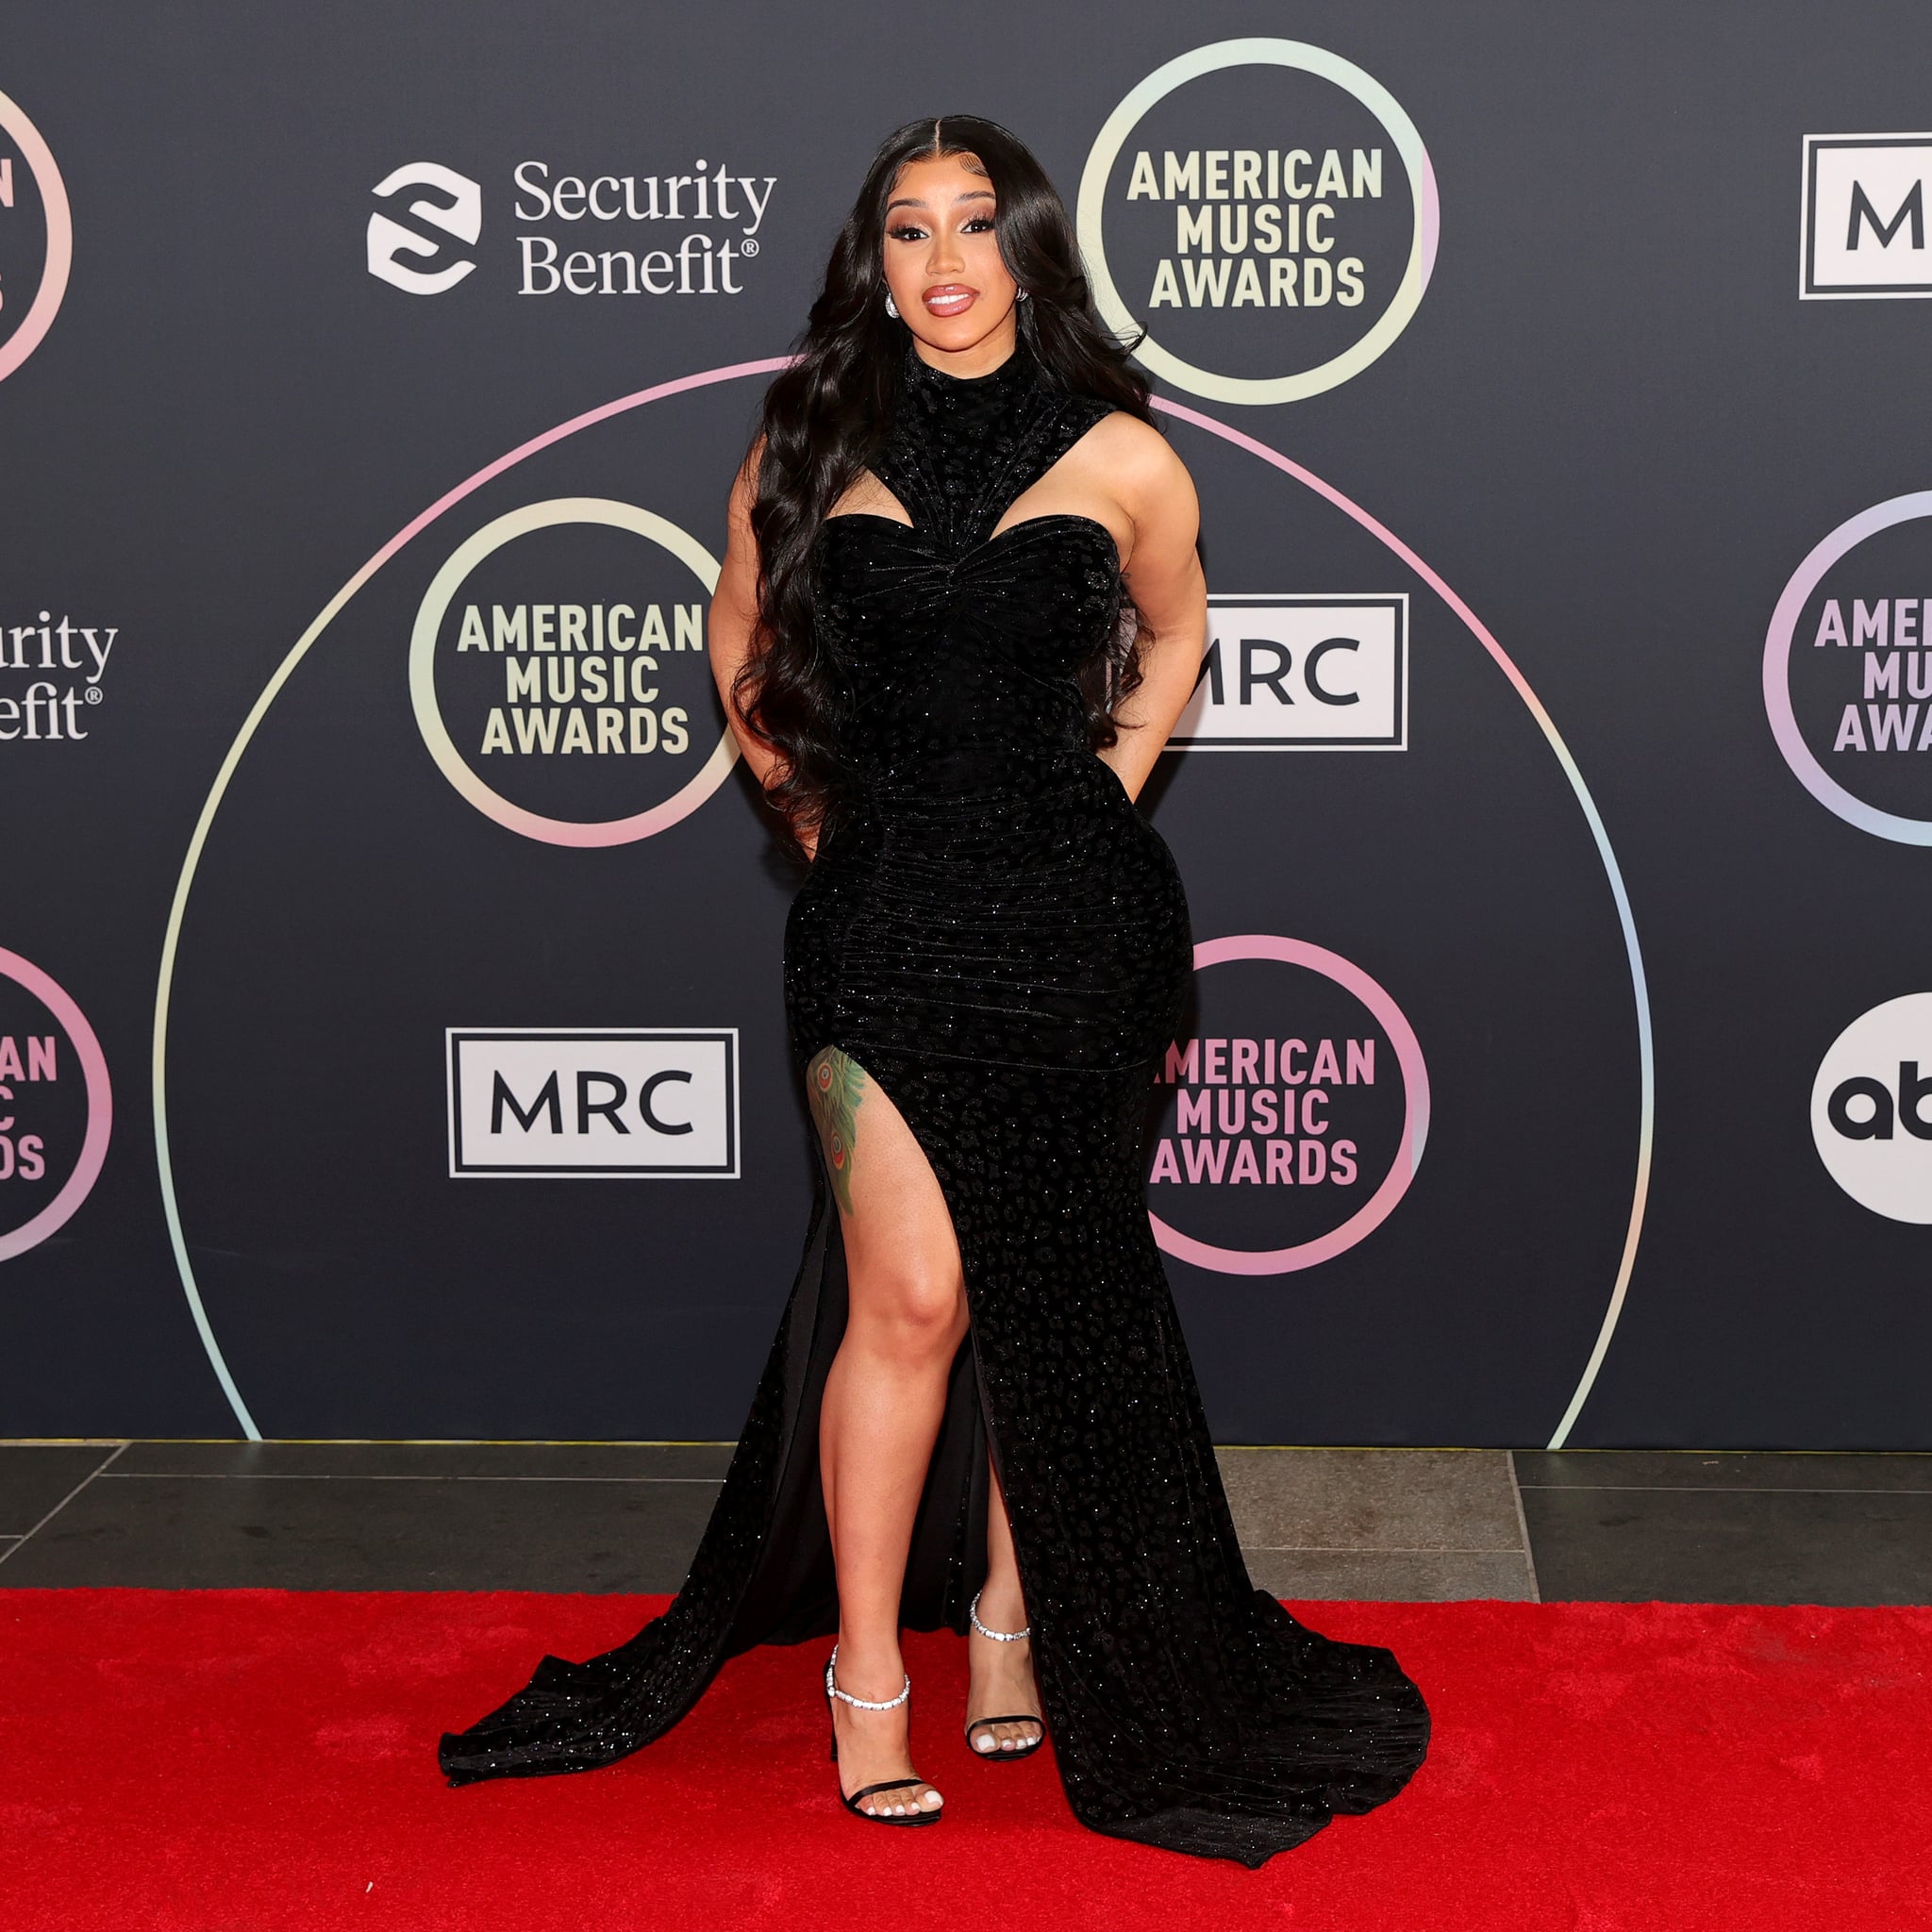 LOS ANGELES, CALIFORNIA - NOVEMBER 19: Host Cardi B attends the 2021 American Music Awards red carpet roll-out with host Cardi B on November 19, 2021 in Los Angeles, California.  (Photo by Rich Fury/Getty Images)